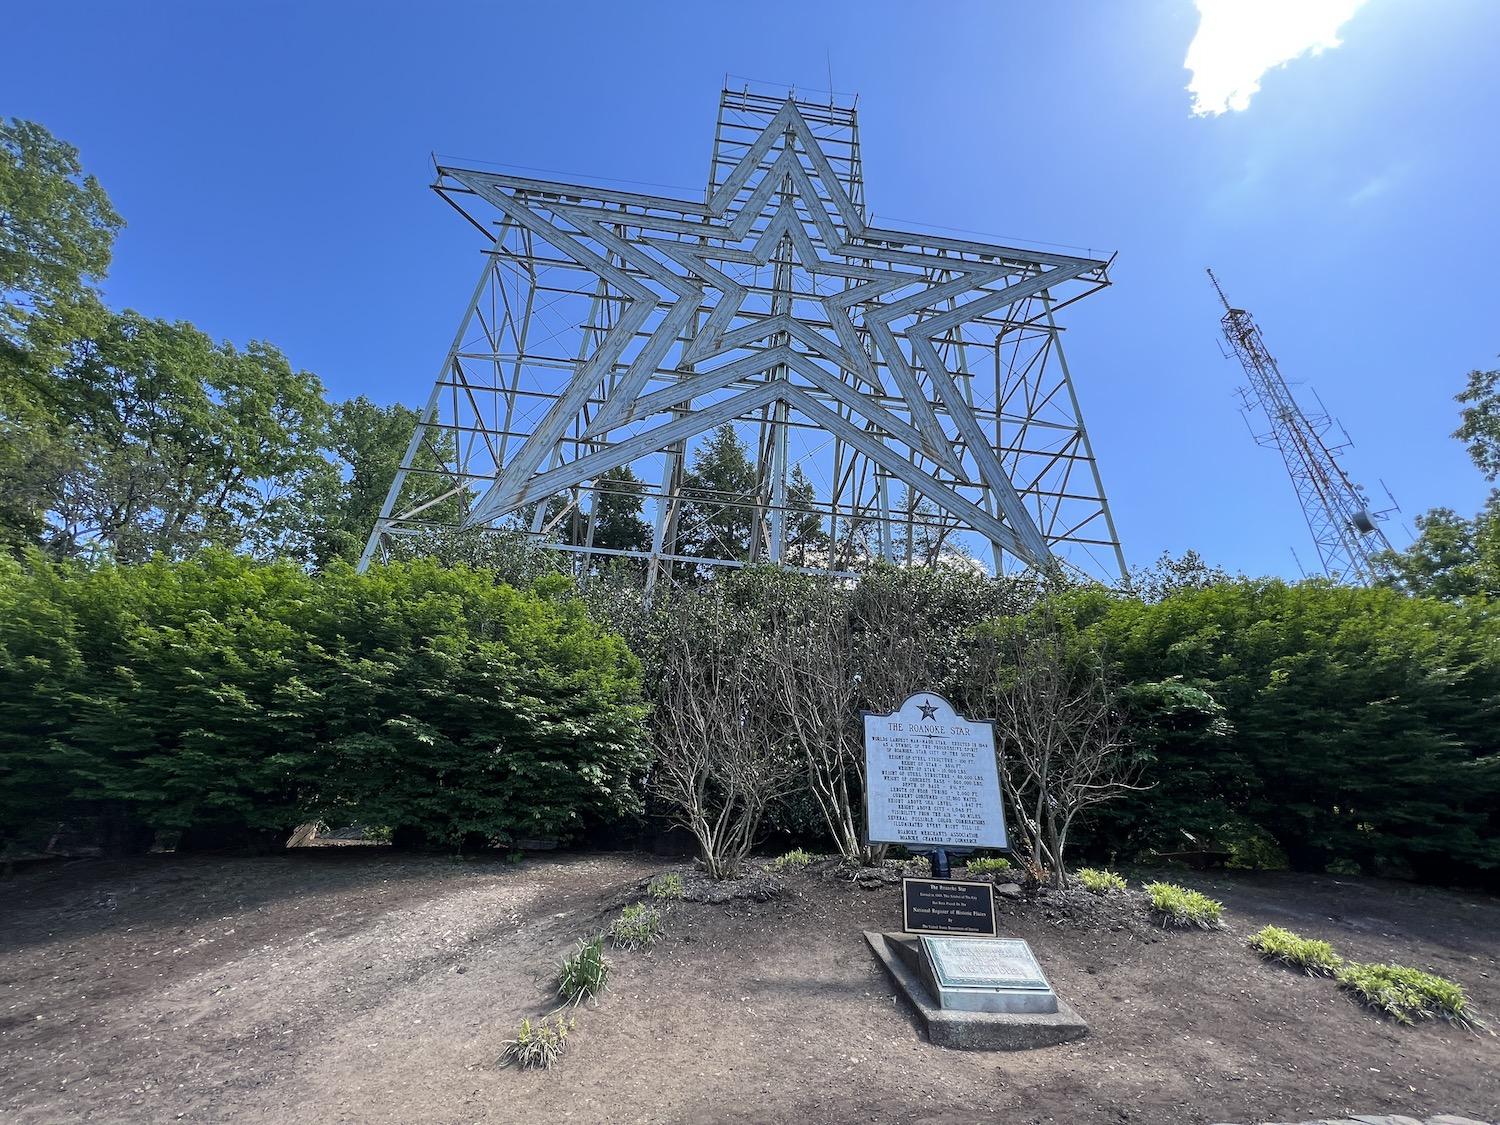 The Roanoke Star looms over the city and is also on the National Register of Historic Places.